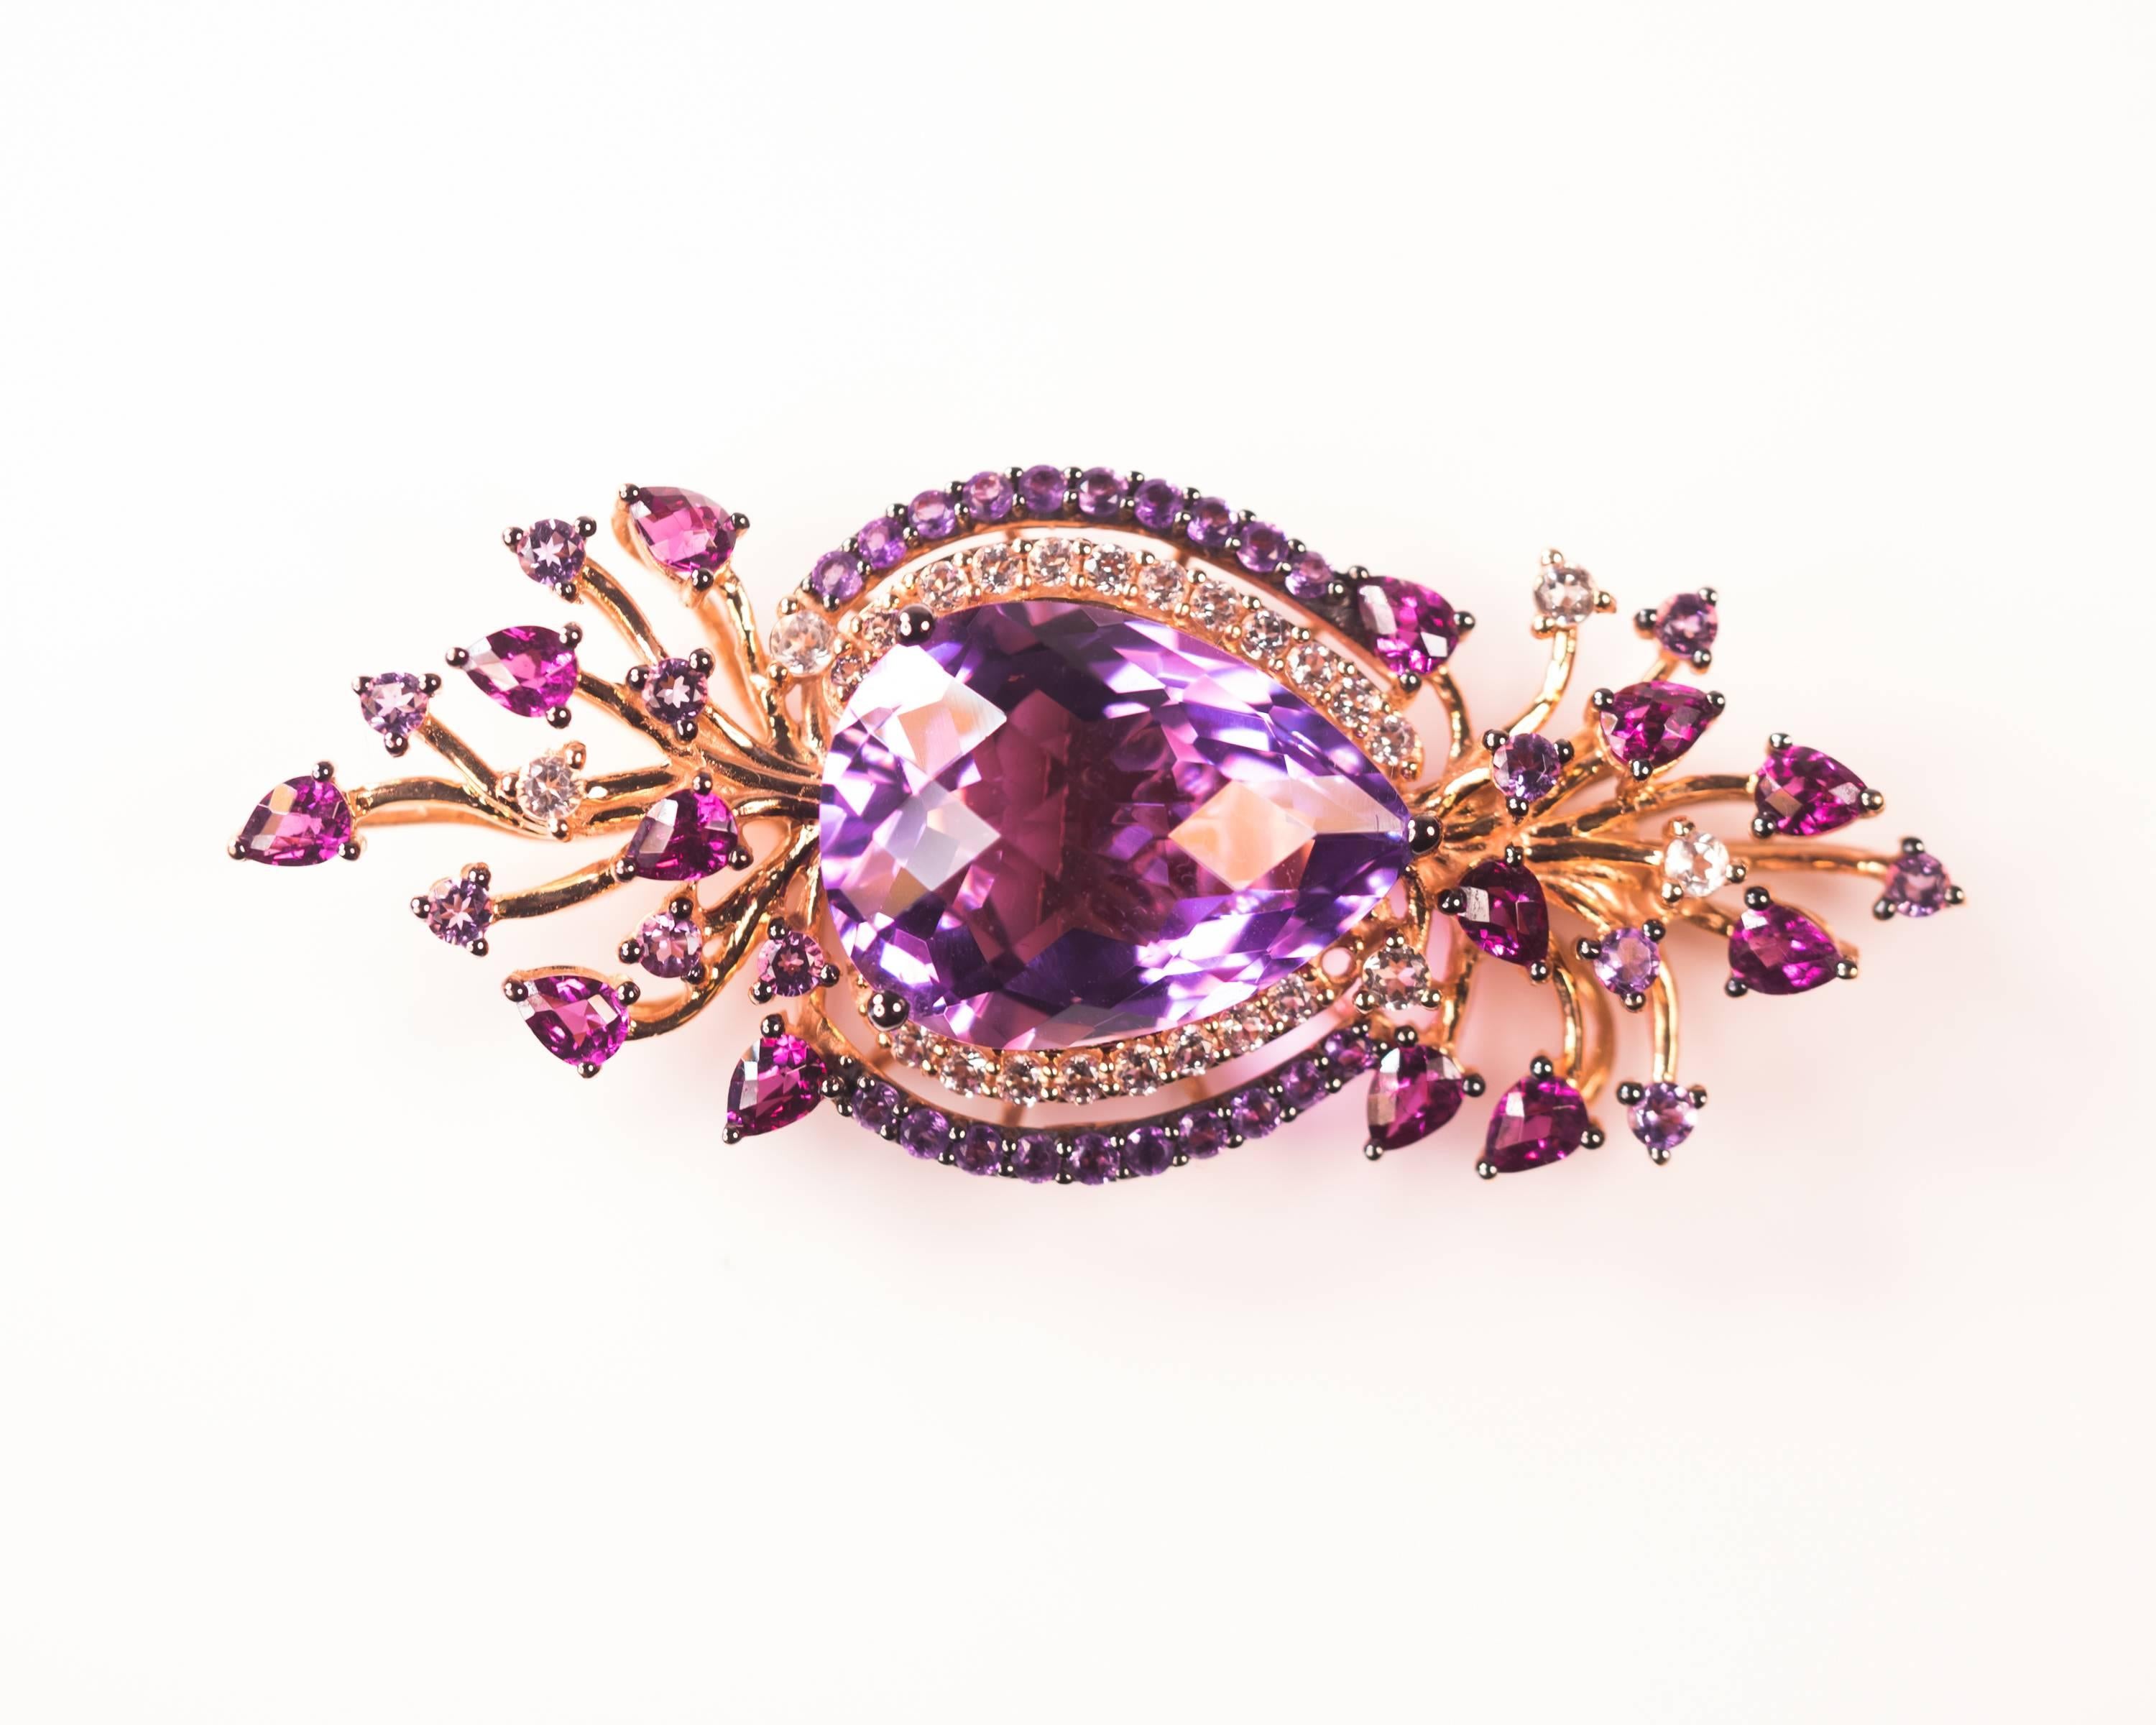 Le Vian Crazy Collection Multi-Stone Pendant in 14 Karat Strawberry Rose Gold - 18.0 carat total weight

Features 15.75 carat total weight pear and round-cut Purple amethyst, 1.75 carat total weight pear-cut rhodolite and .75 carat total weight